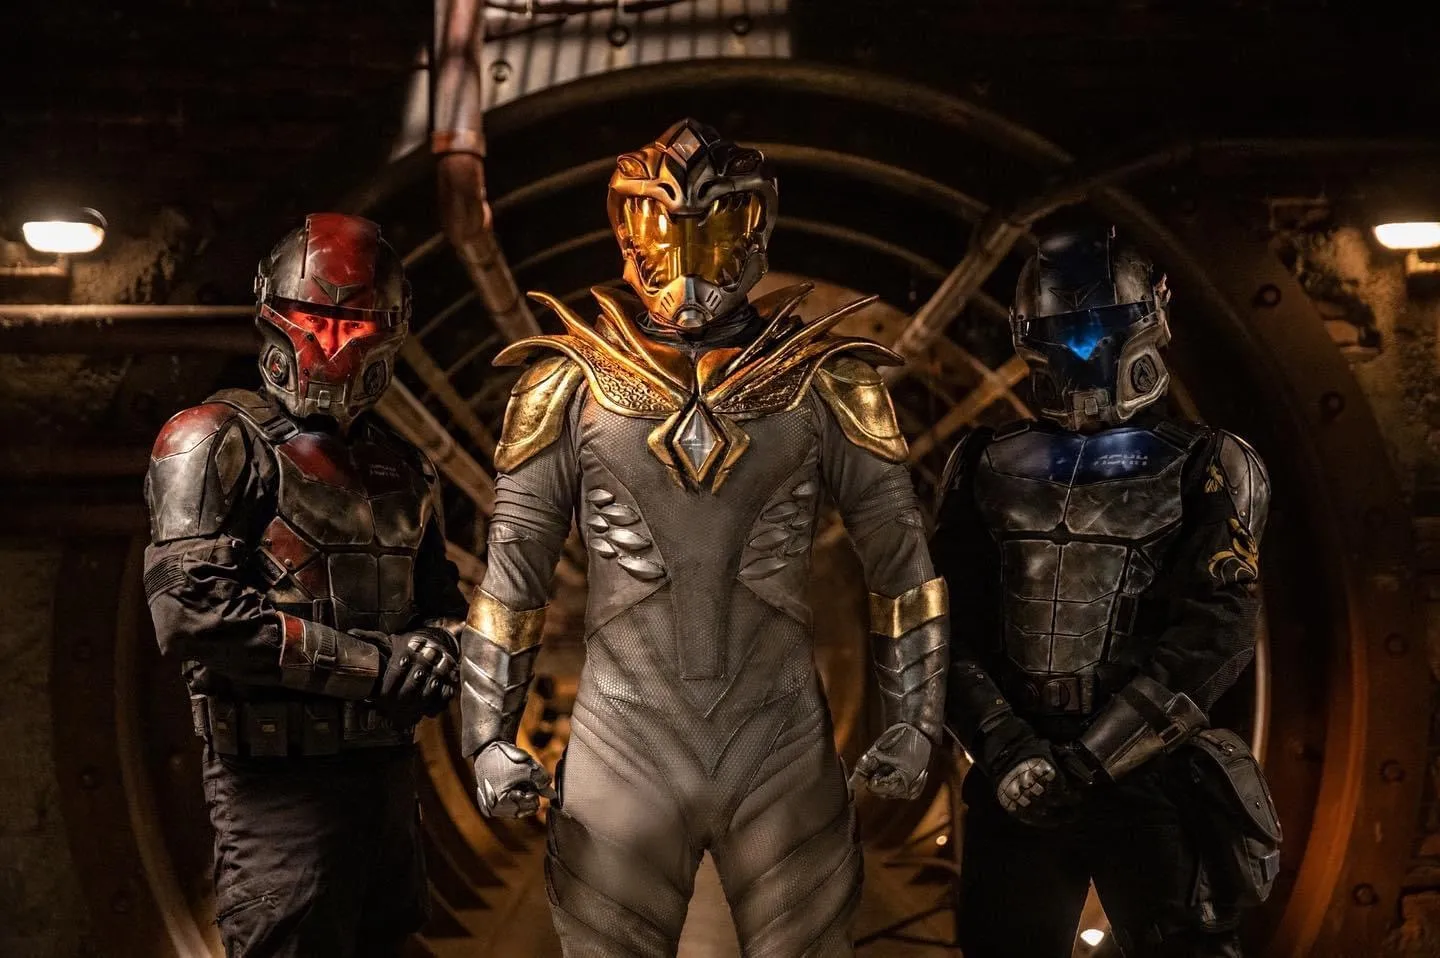 The Legend of the White Dragon trailer brings Jason David Frank to the movies one more time for a Power Rangers-like final adventure.